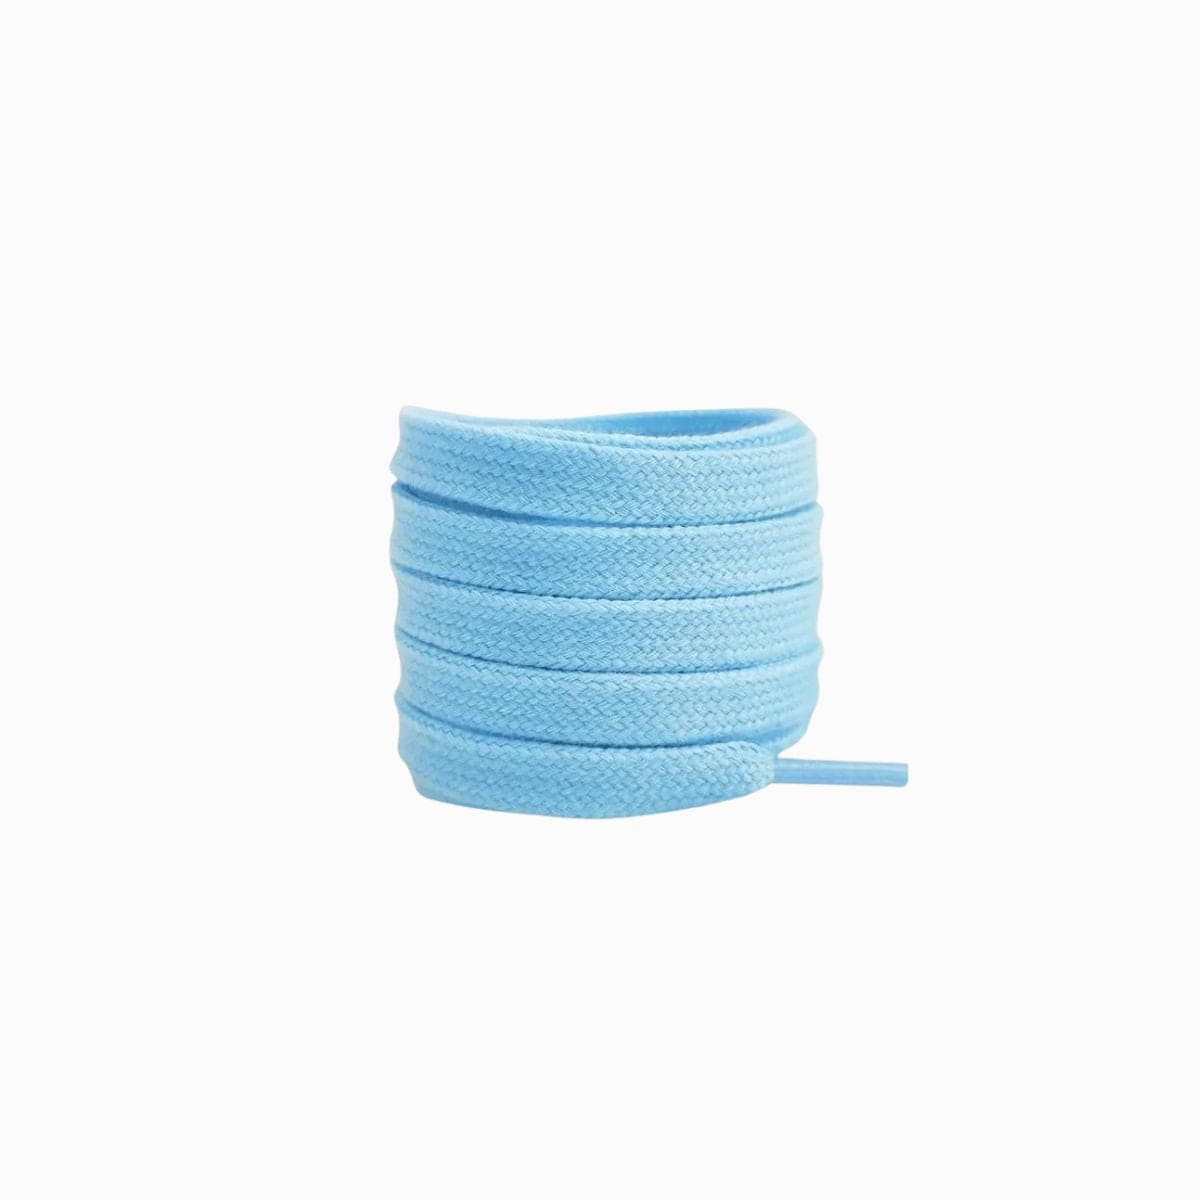 Light Blue Replacement Adidas Shoe Laces for Adidas Samba ADV Sneakers by Kicks Shoelaces